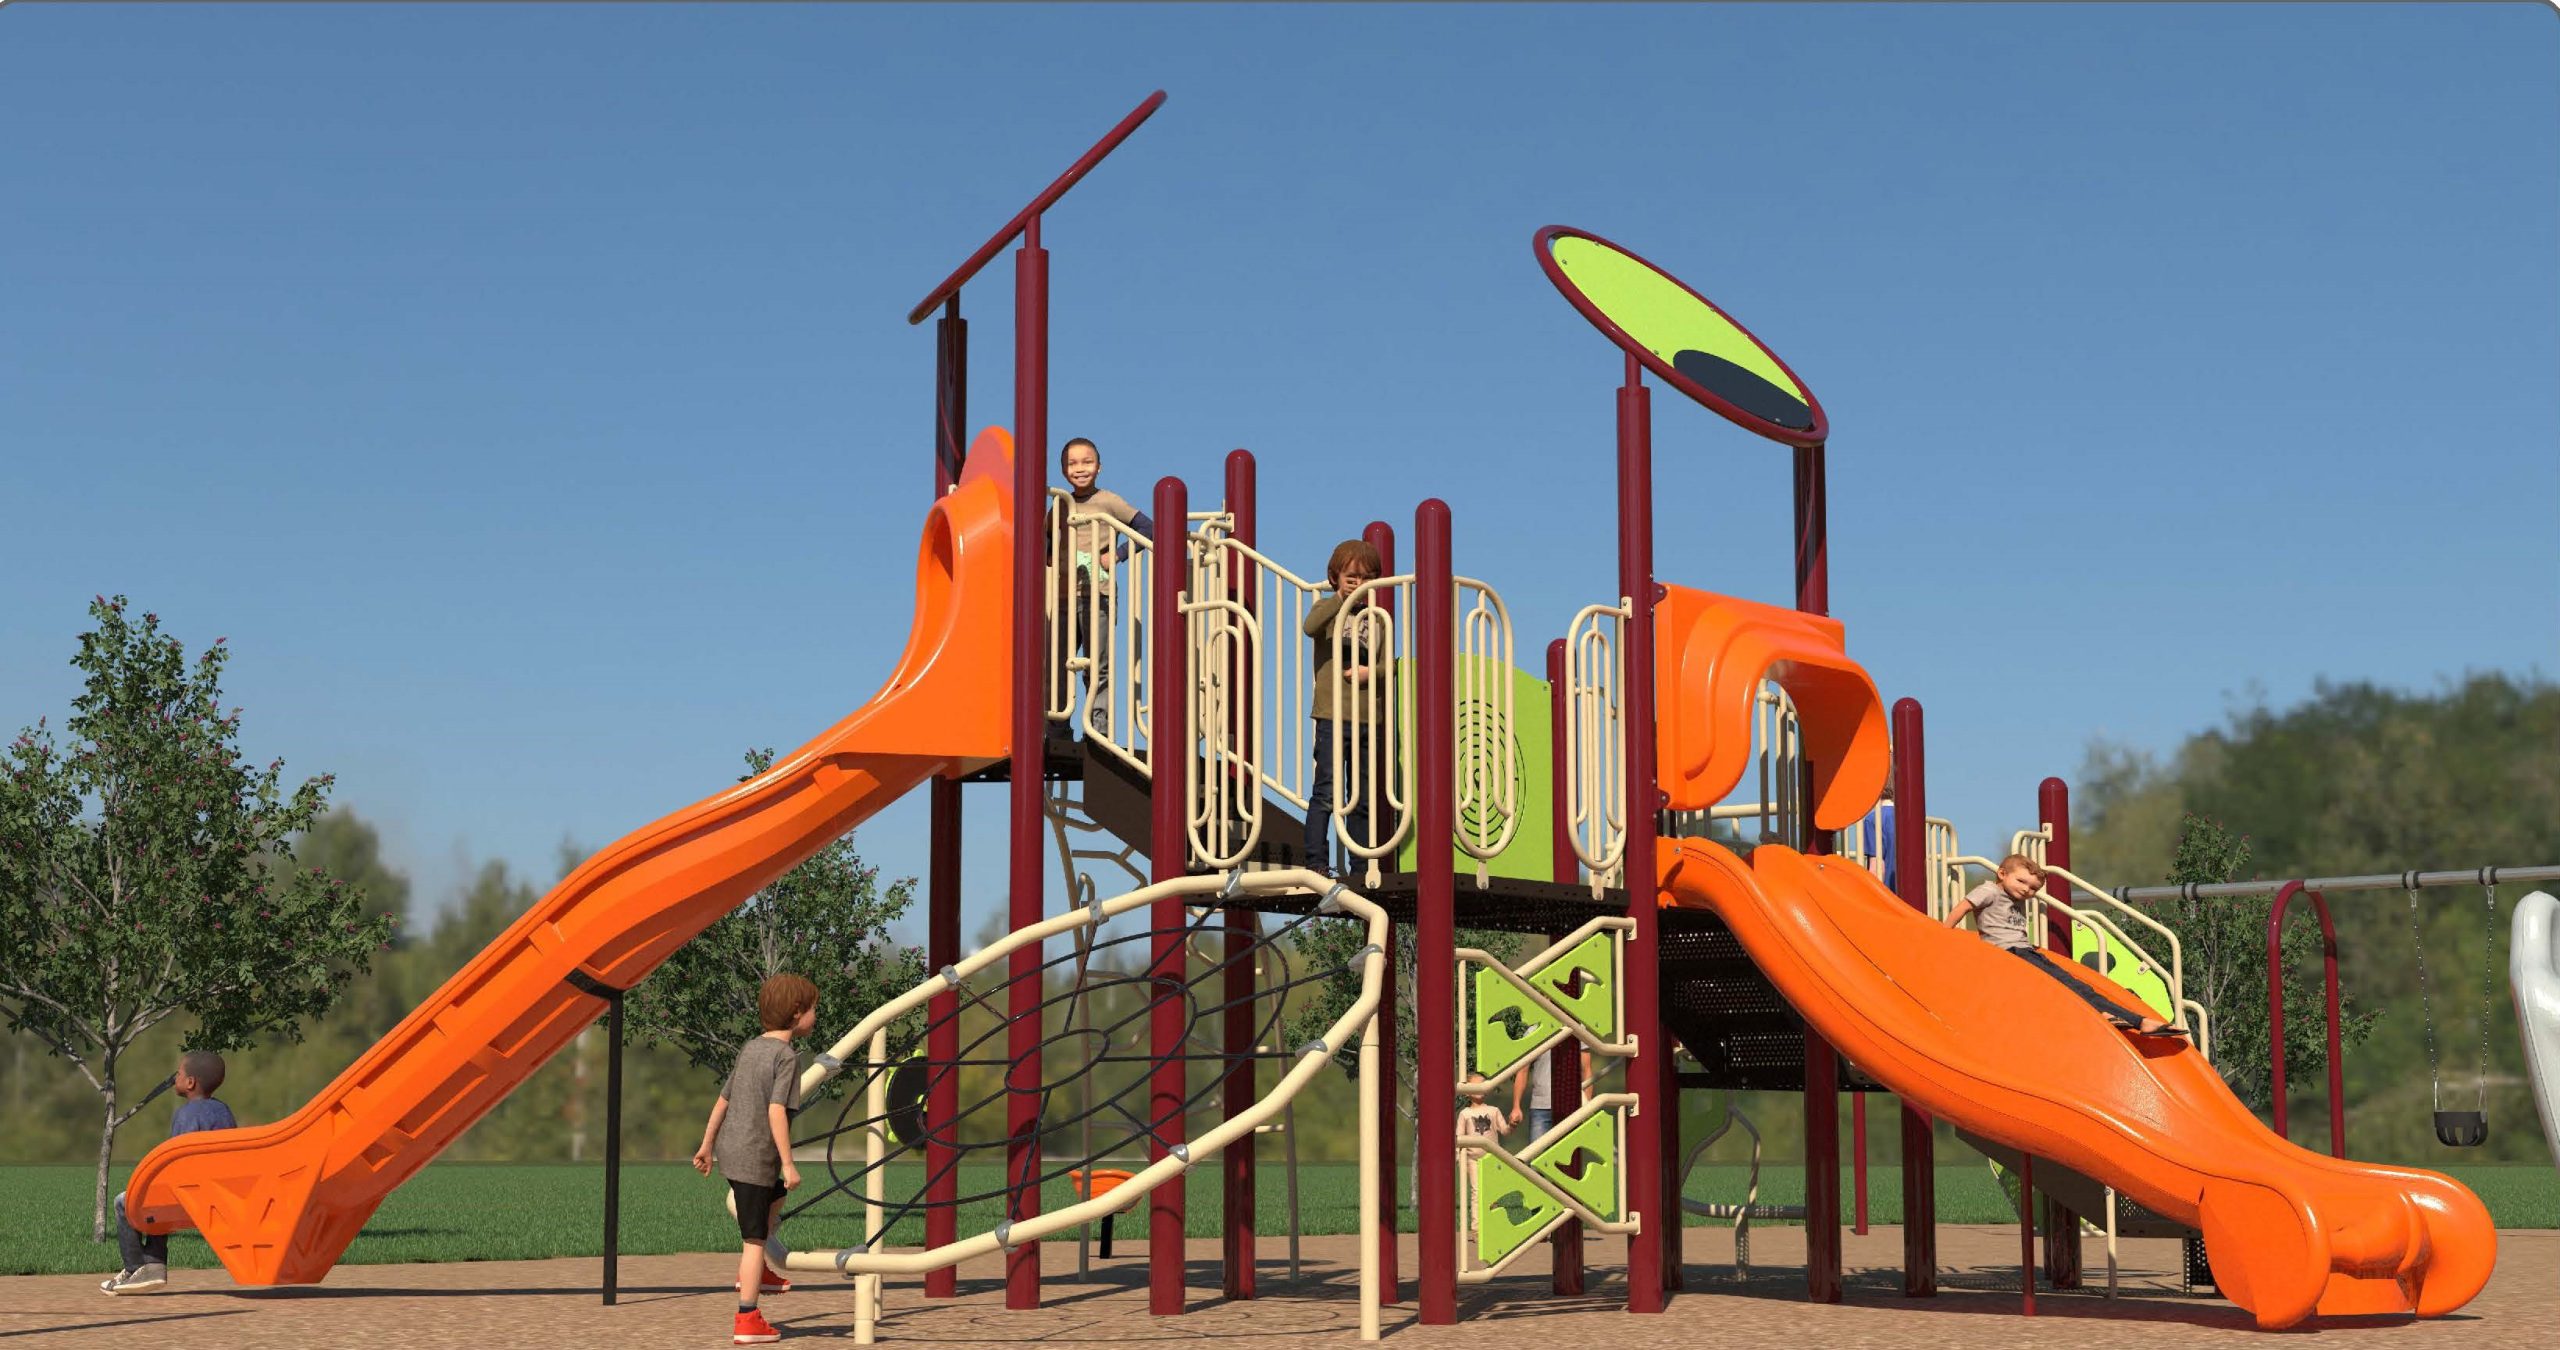 Image of the senior play structure in the final design for the Bob Acton Park Playground. The play structure includes three slides, a climbing features, and sensory play equipment.